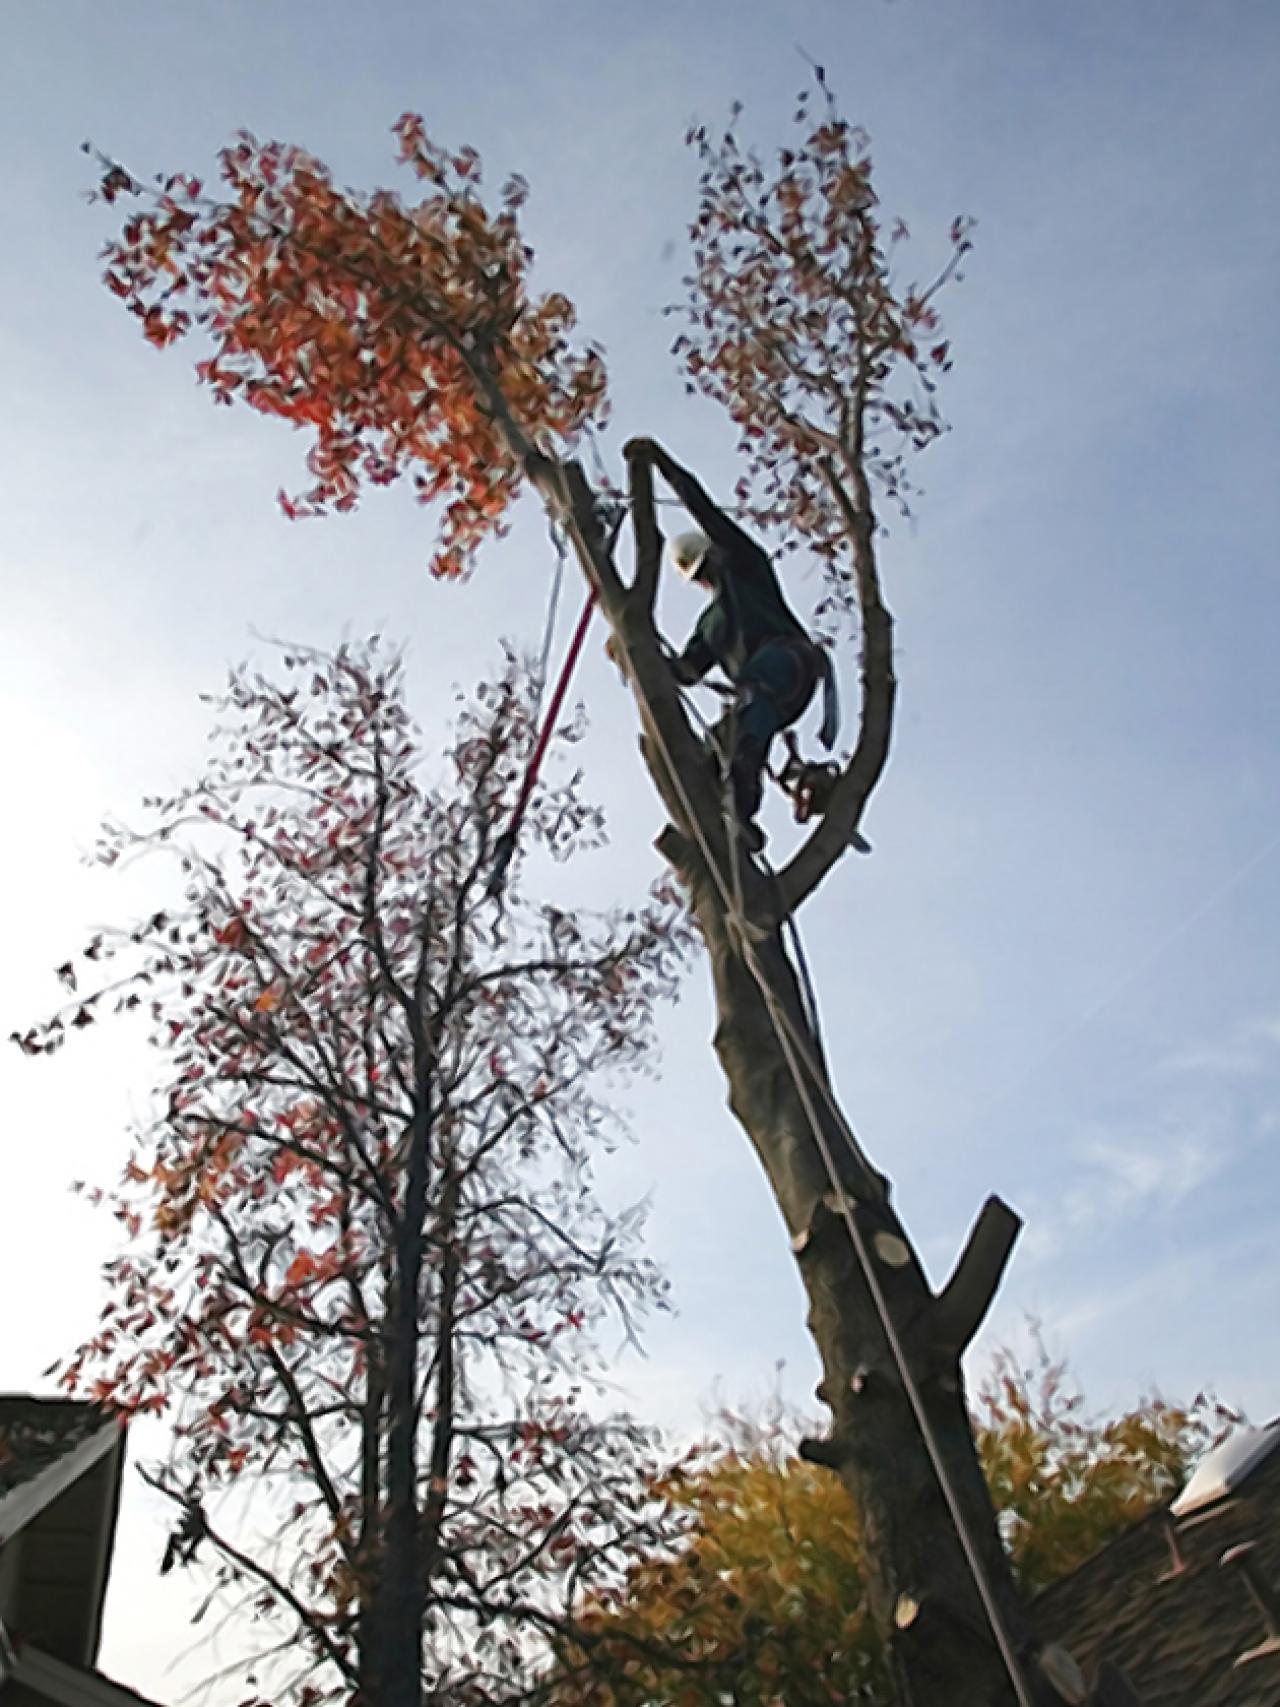 Tree Removal: You May Want to Consider an Expert | HGTV